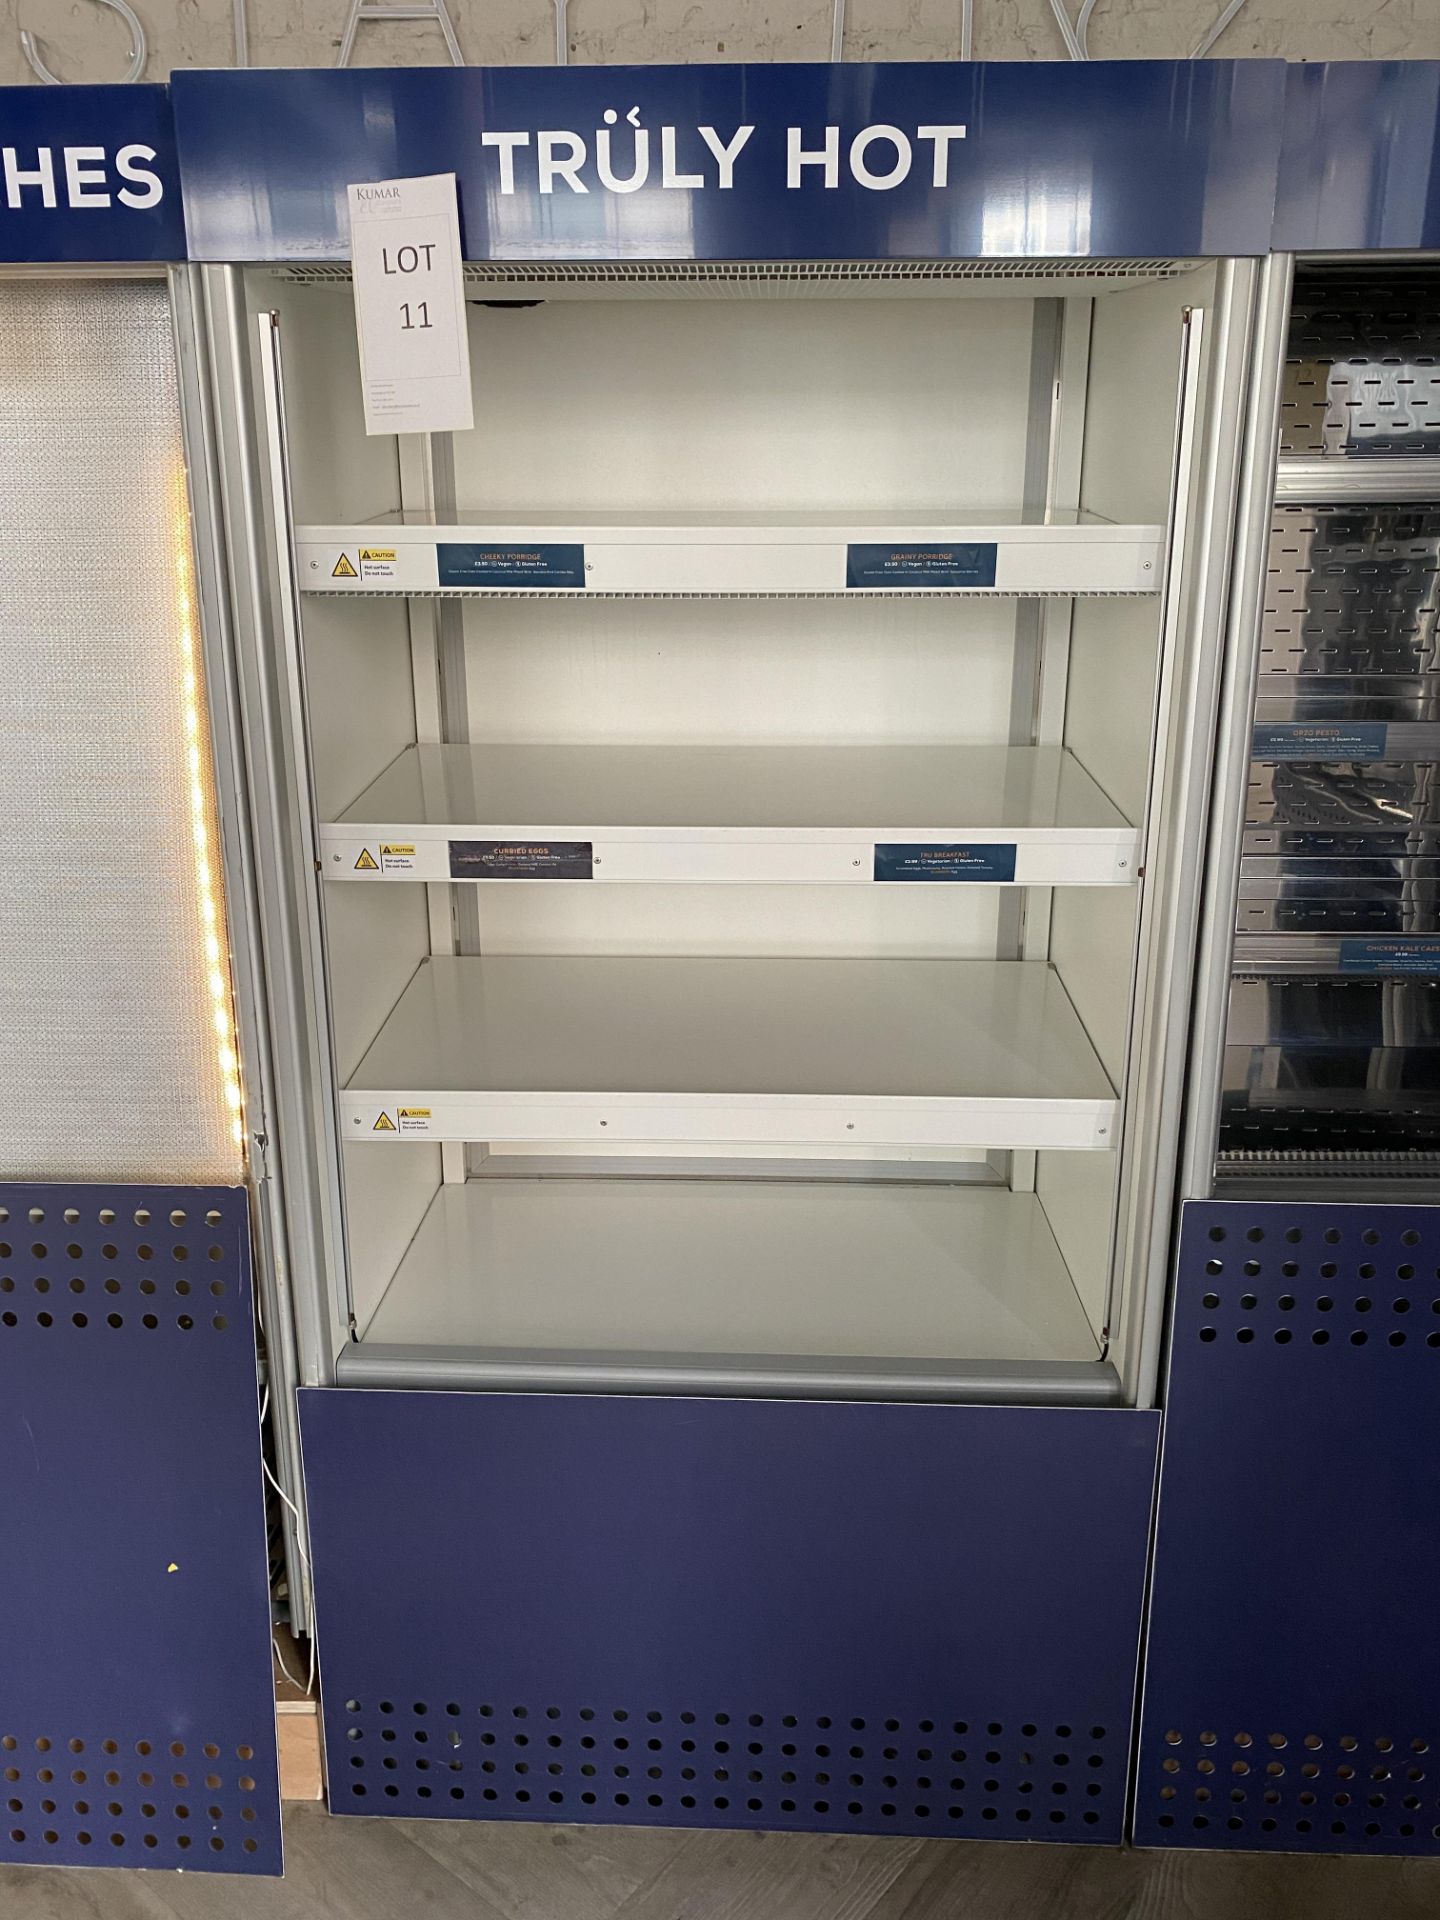 Williams Slimline Gem Multideck Heated Food Merchandising Unit with Night Blind and Electronic